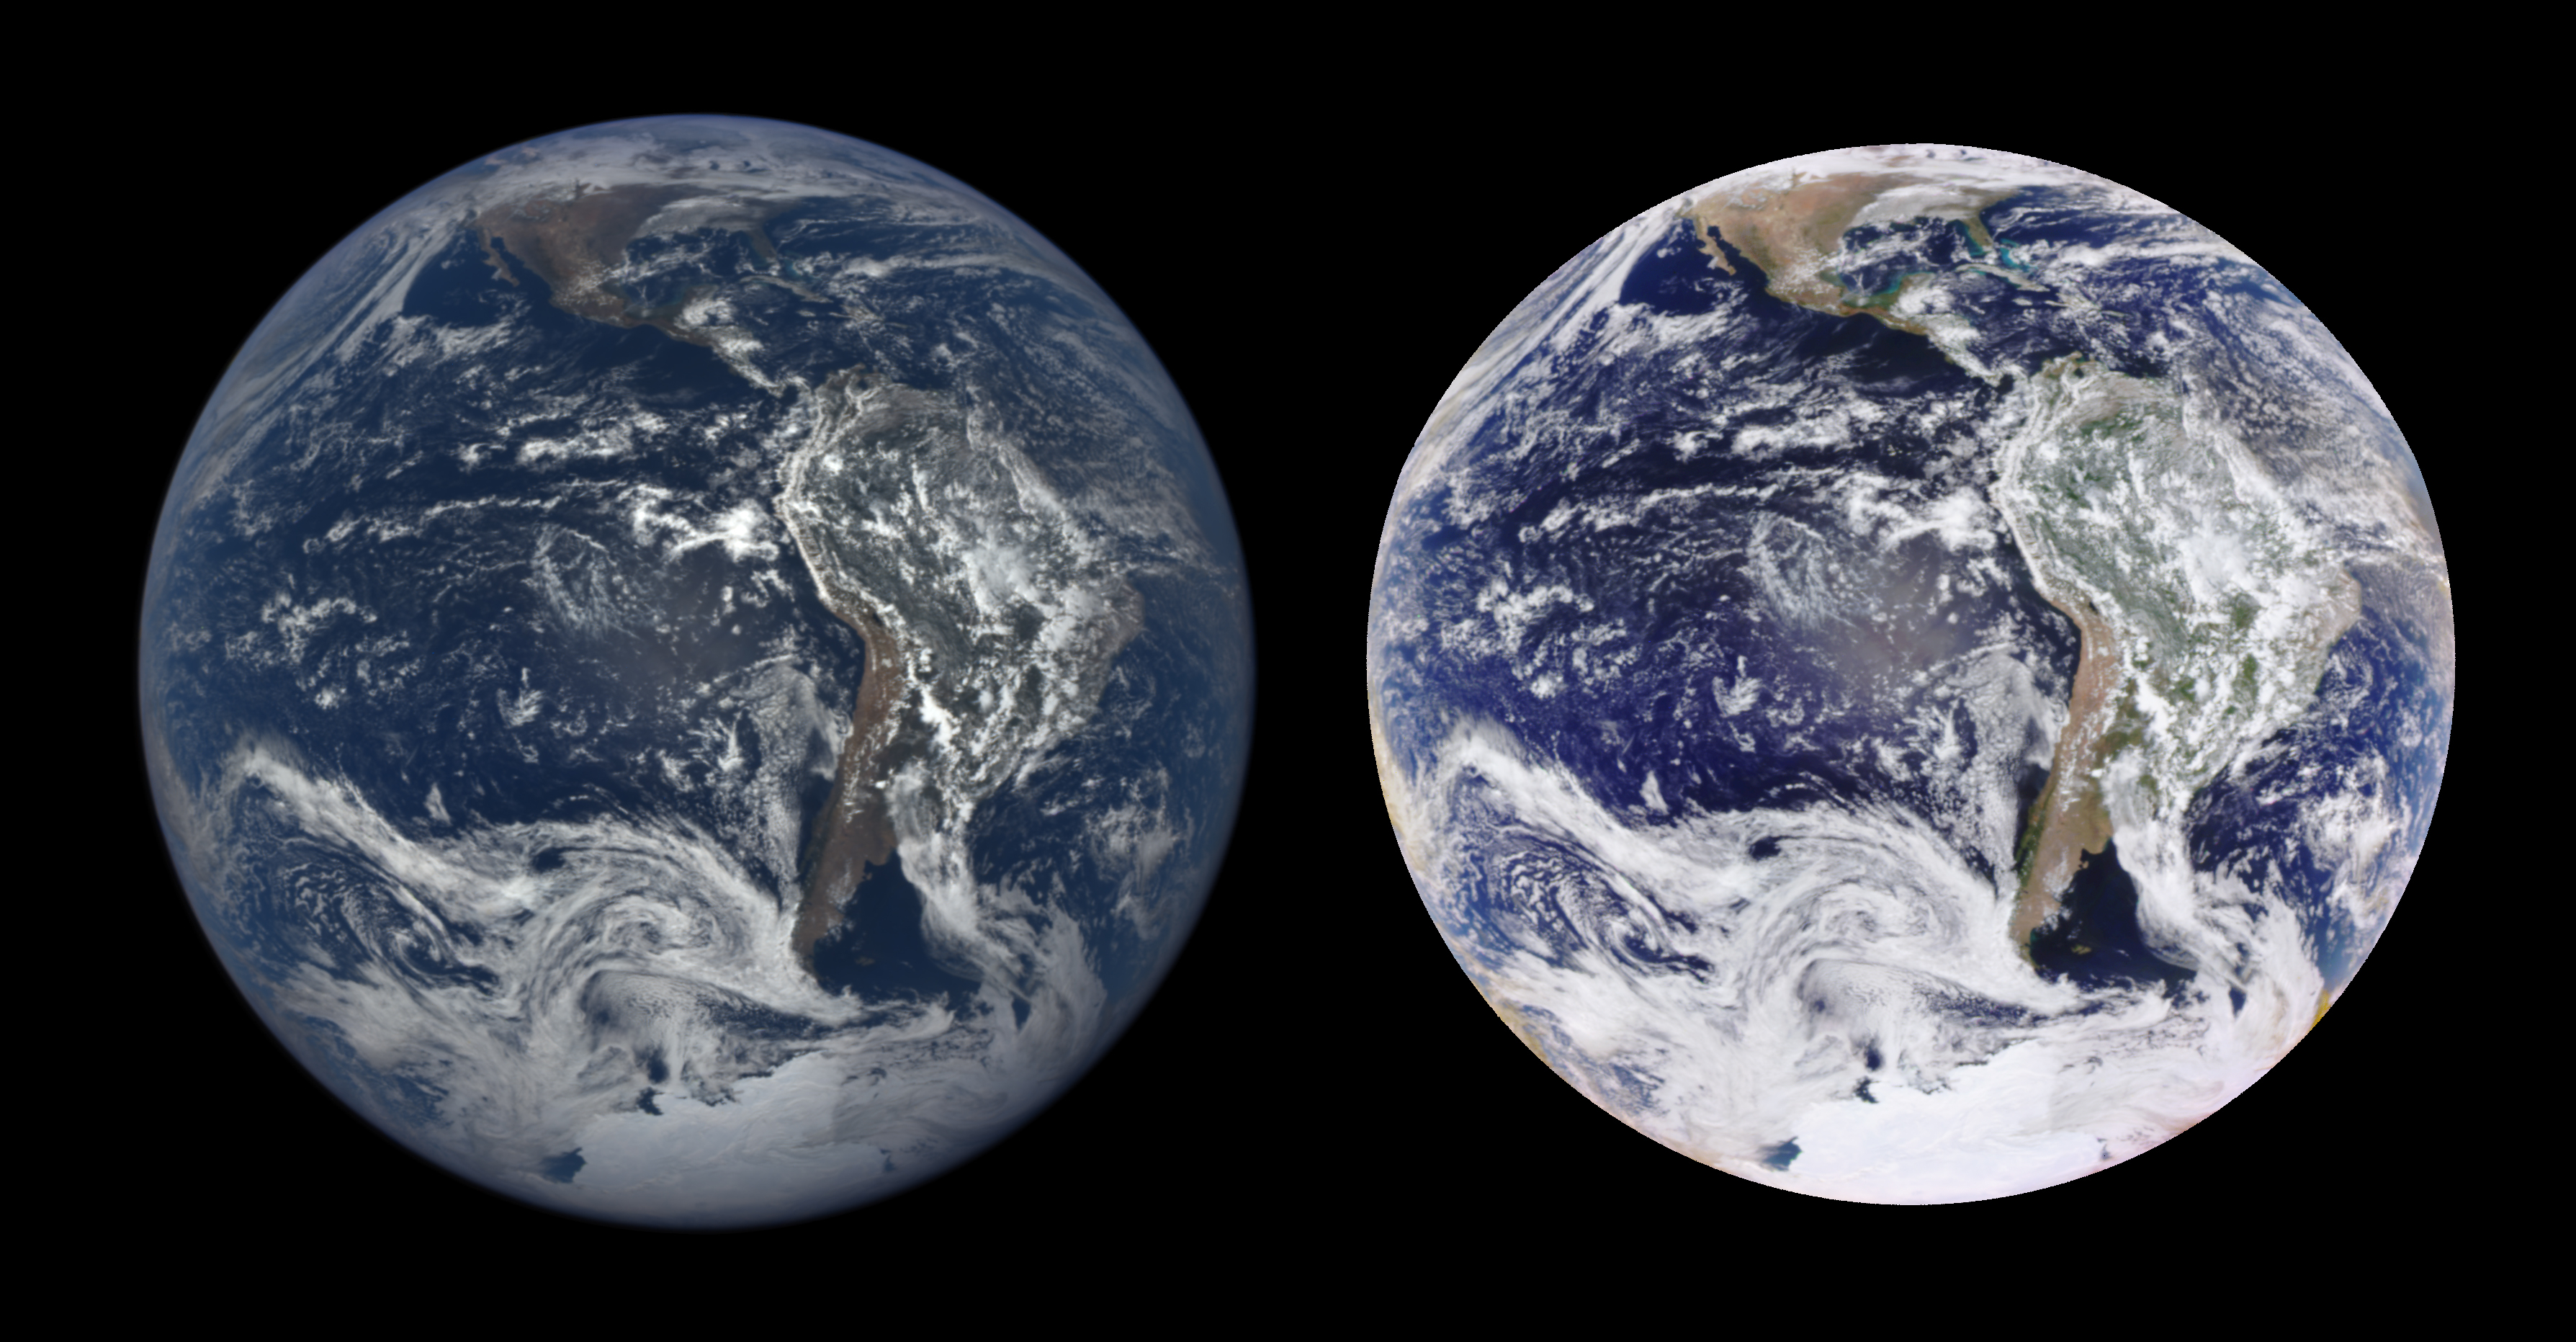 3577x1863 NASA's Home for EPIC Photos of Earth from Space Just Got Better | Space